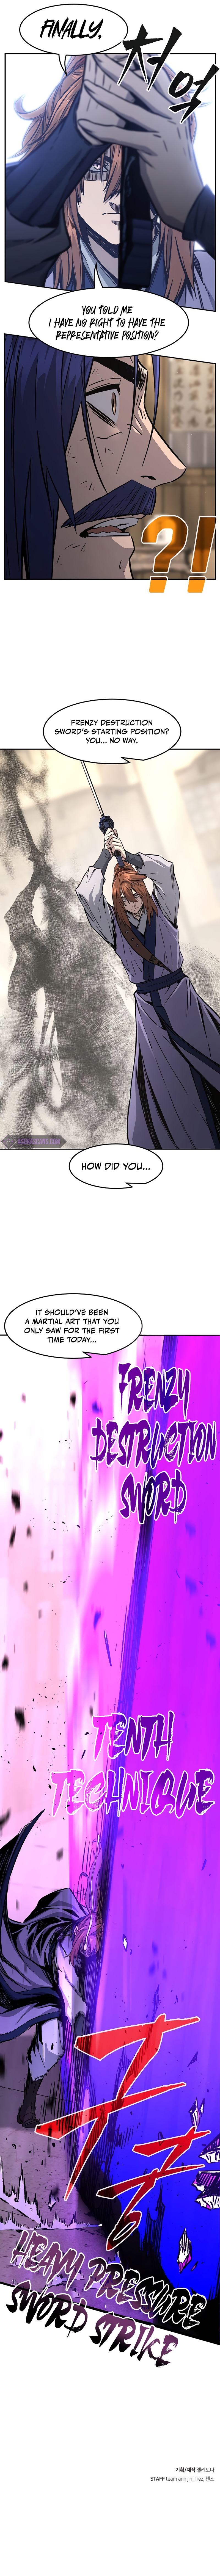 Absolute Sword Sense - Chapter 63 Page 13